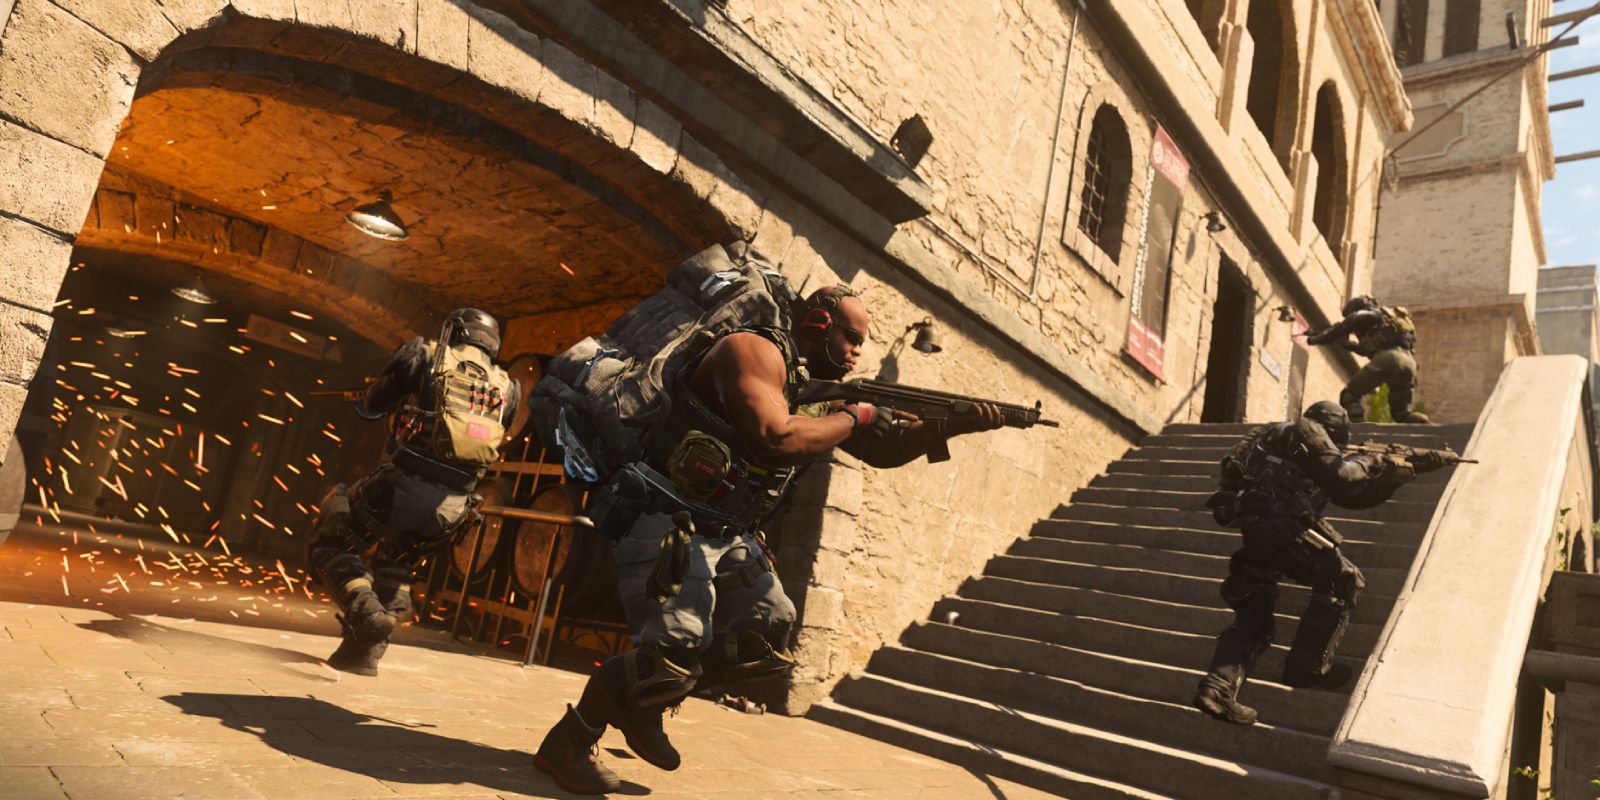 Several Modern Warfare 2 players moving around the exterior of a building.